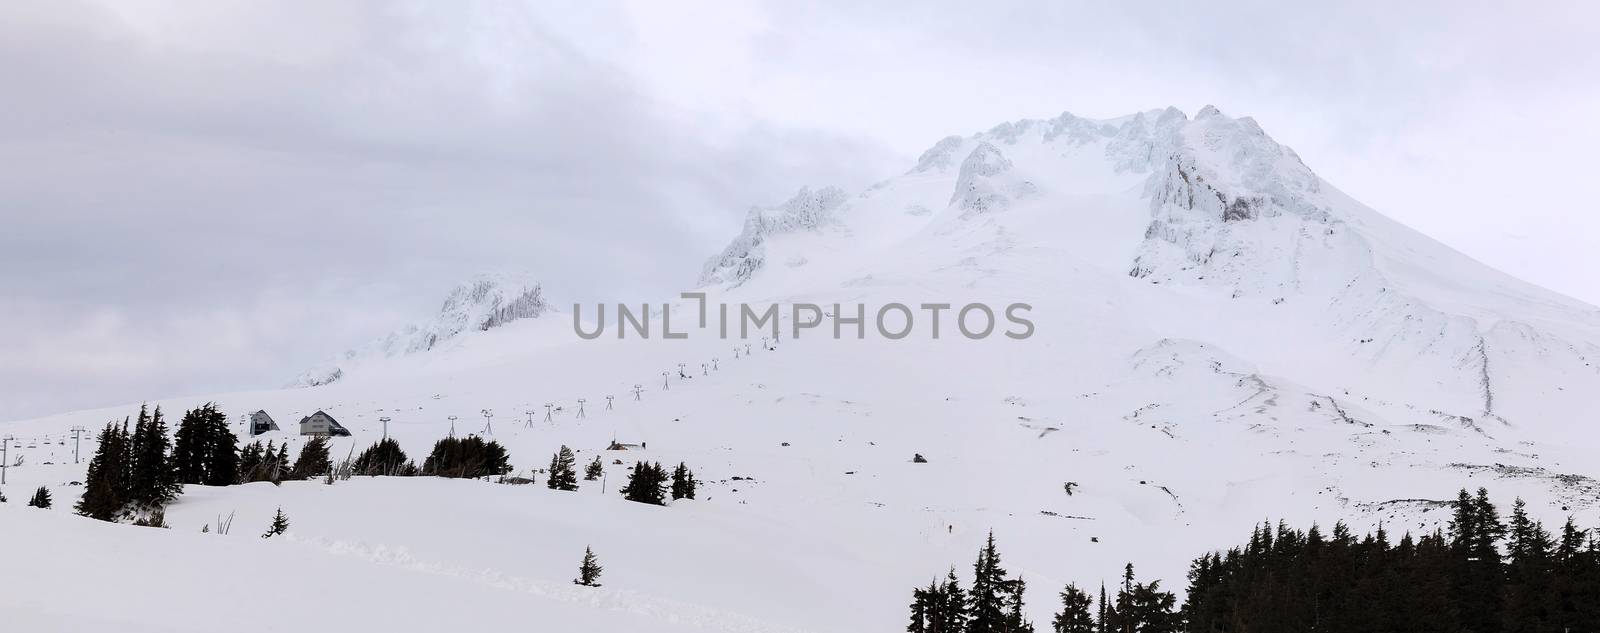 Ski Lift on the Slope of Mount Hood by jpldesigns